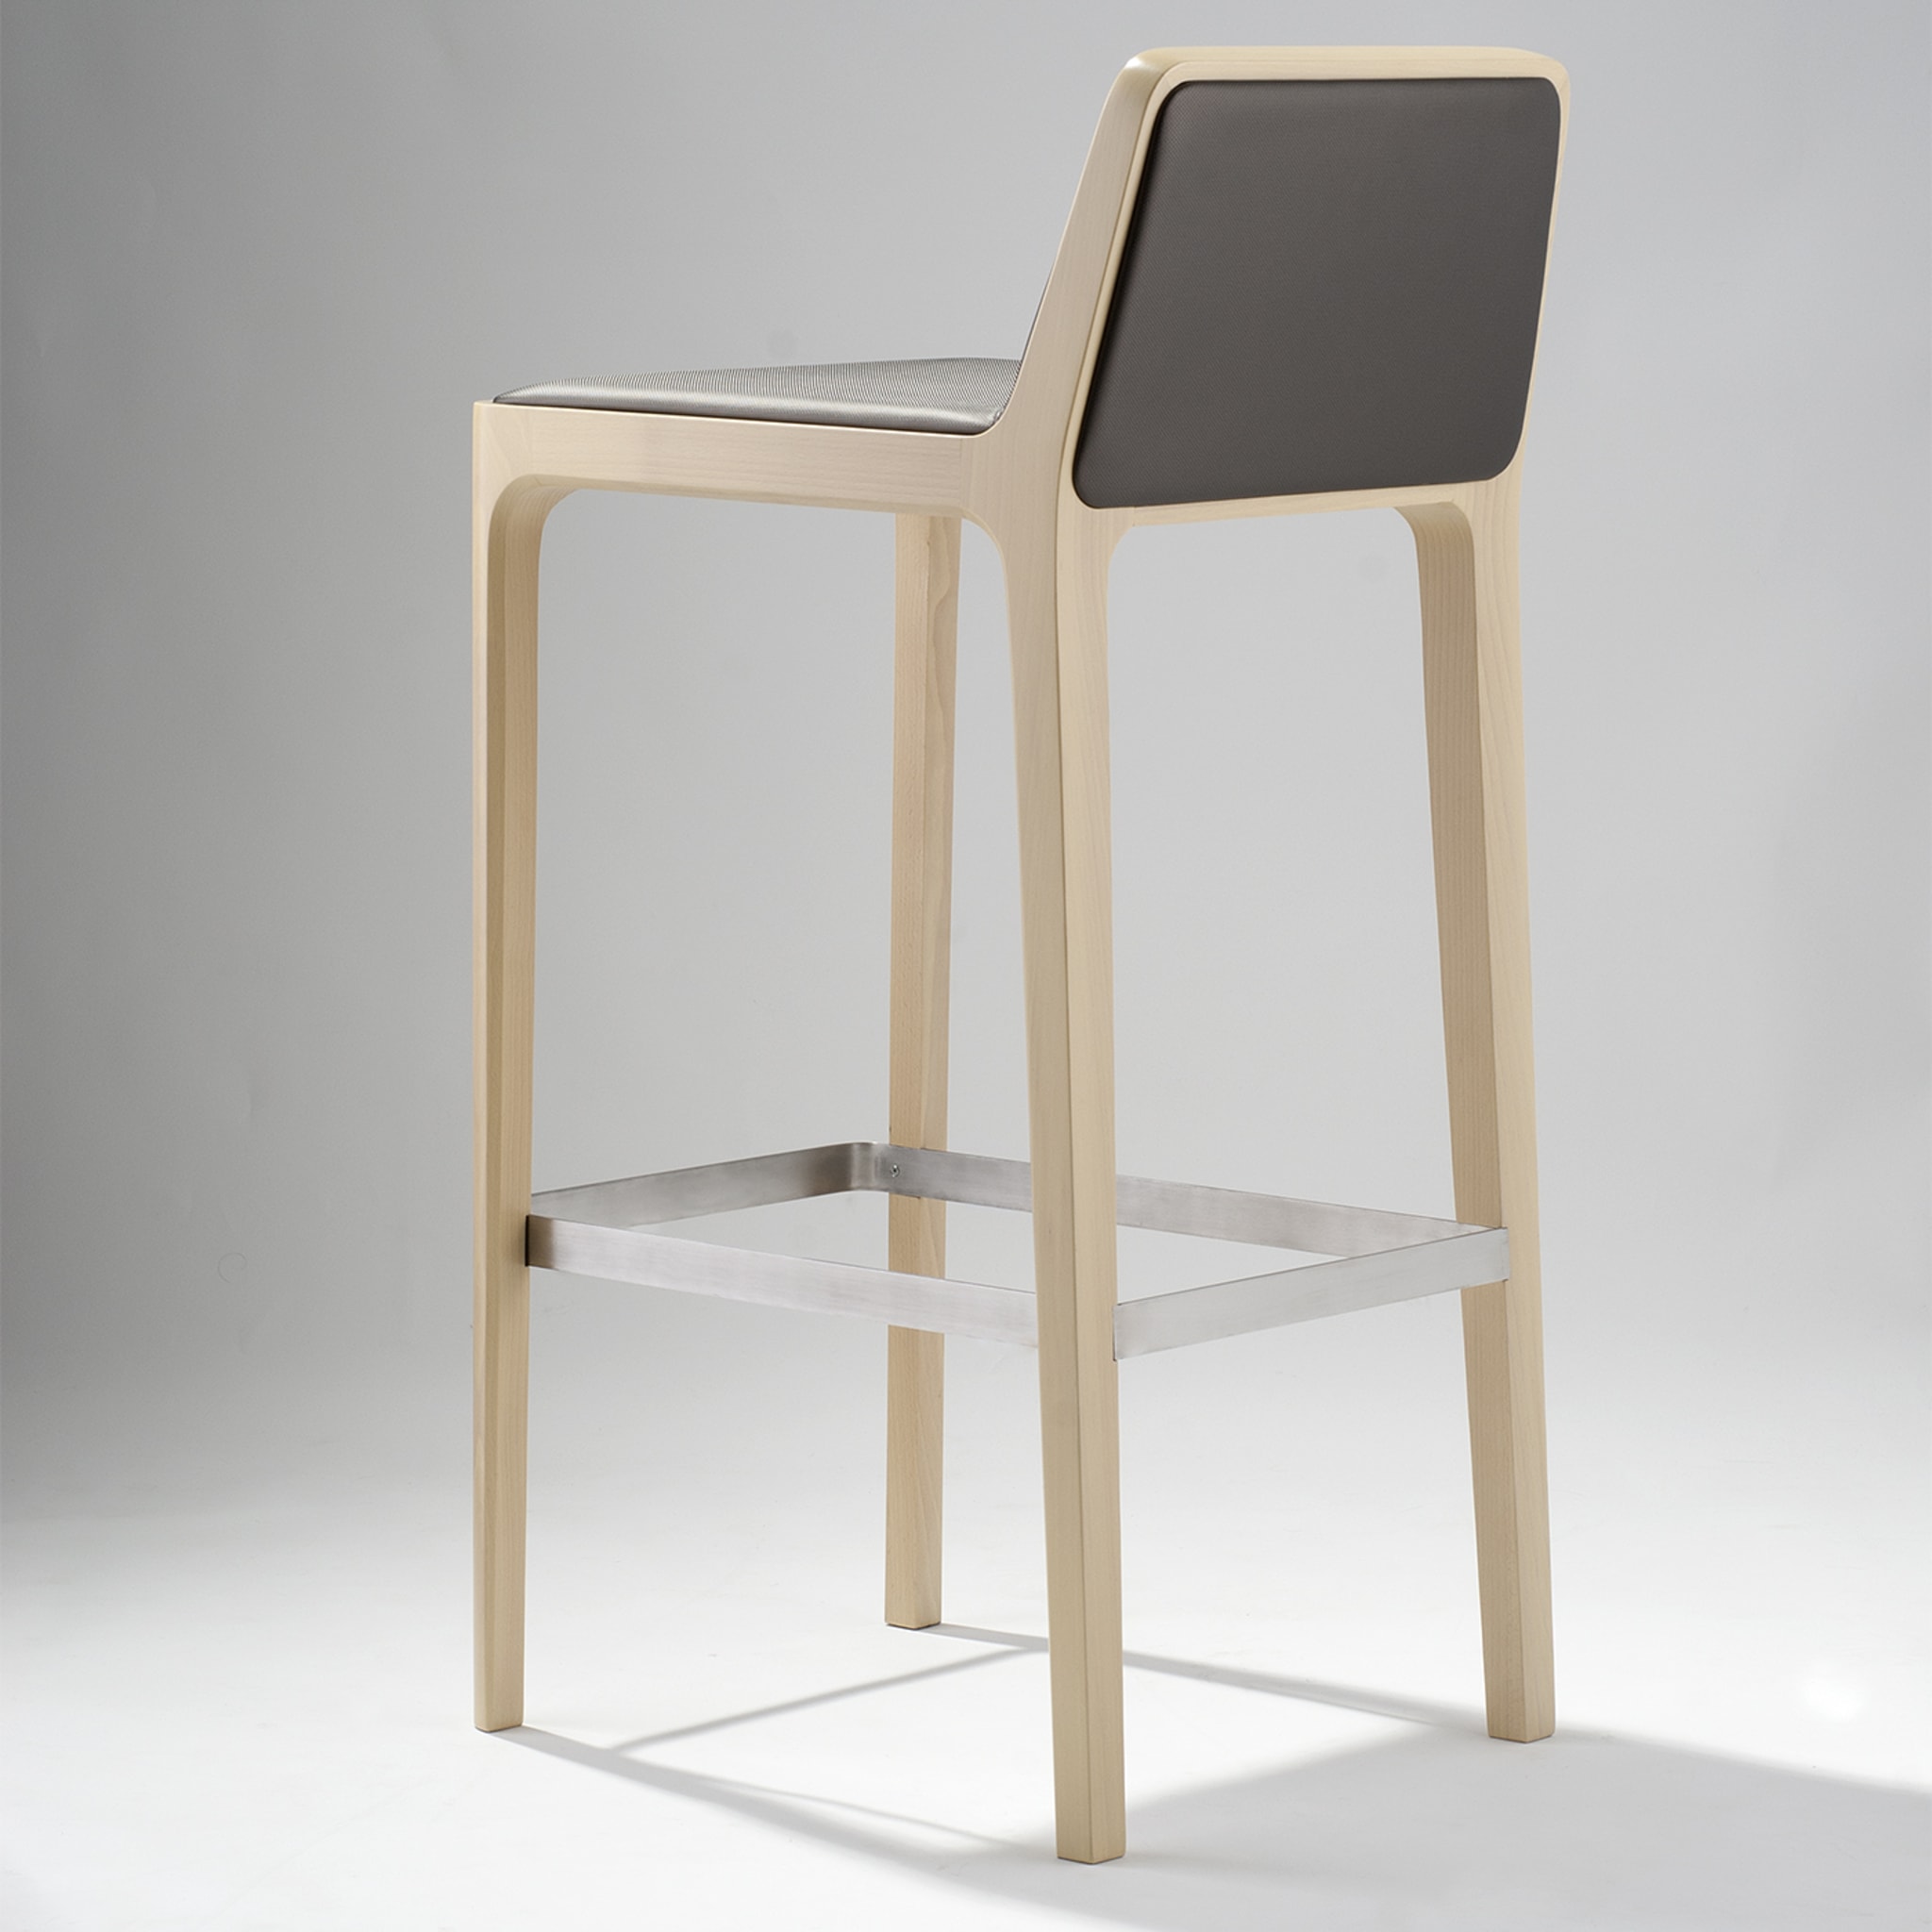 Tip Tap 383 Bar Stool by Claudio Perin - Alternative view 1